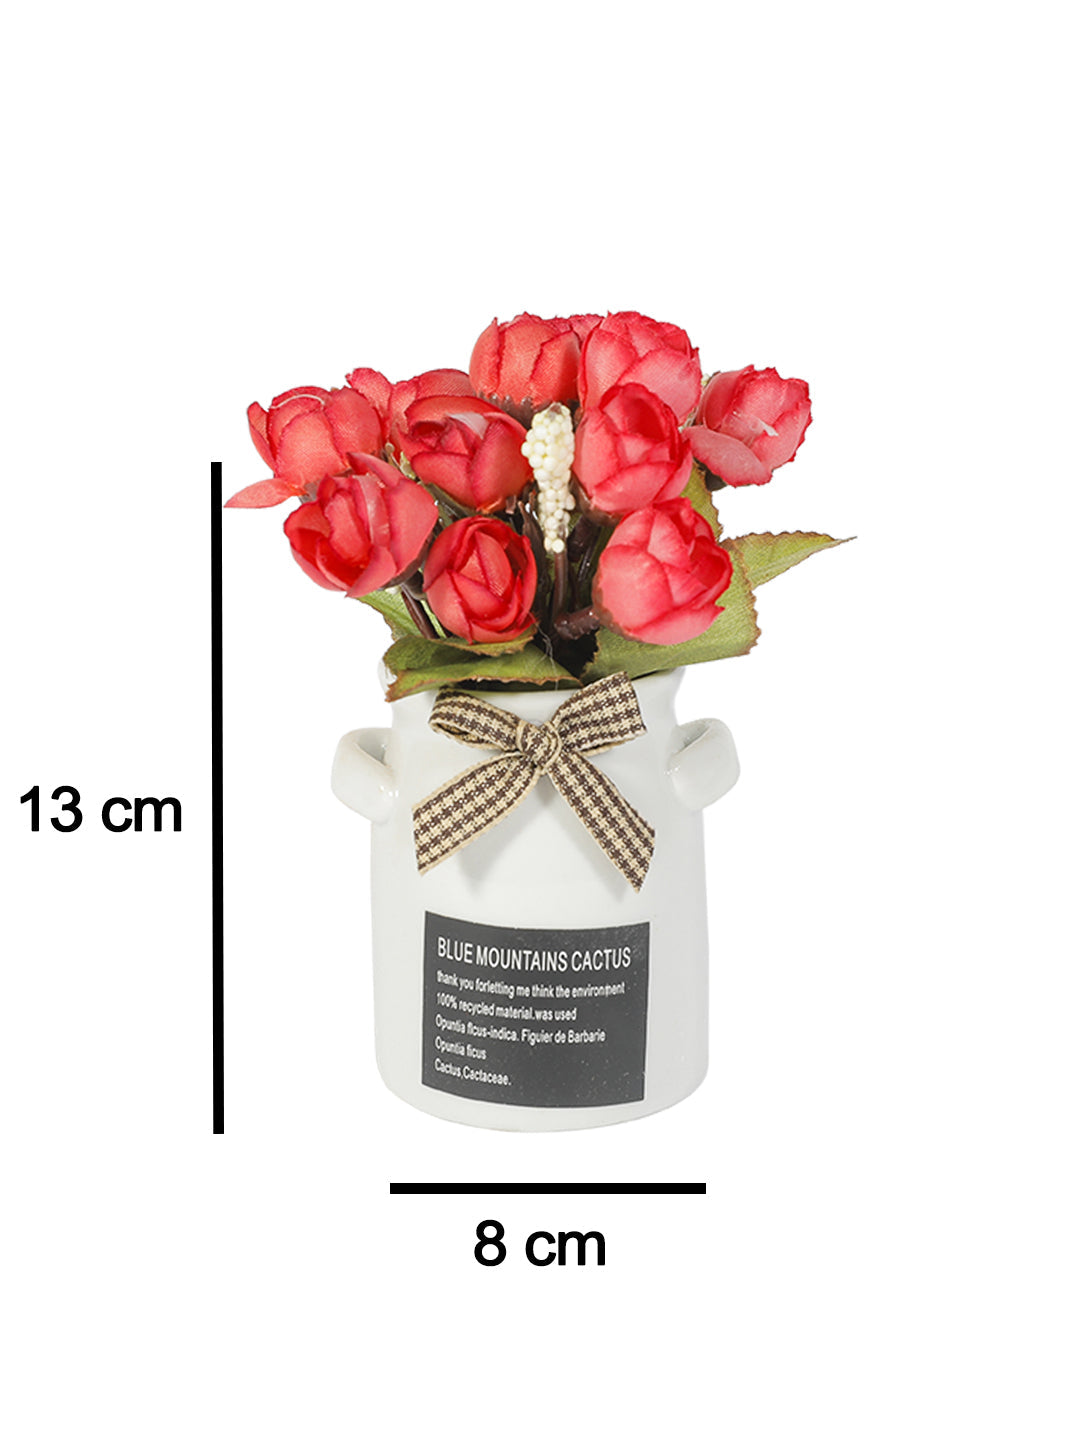 VON CASA Cylindrical Plastic Flower With Pot - Red Rose White Pot